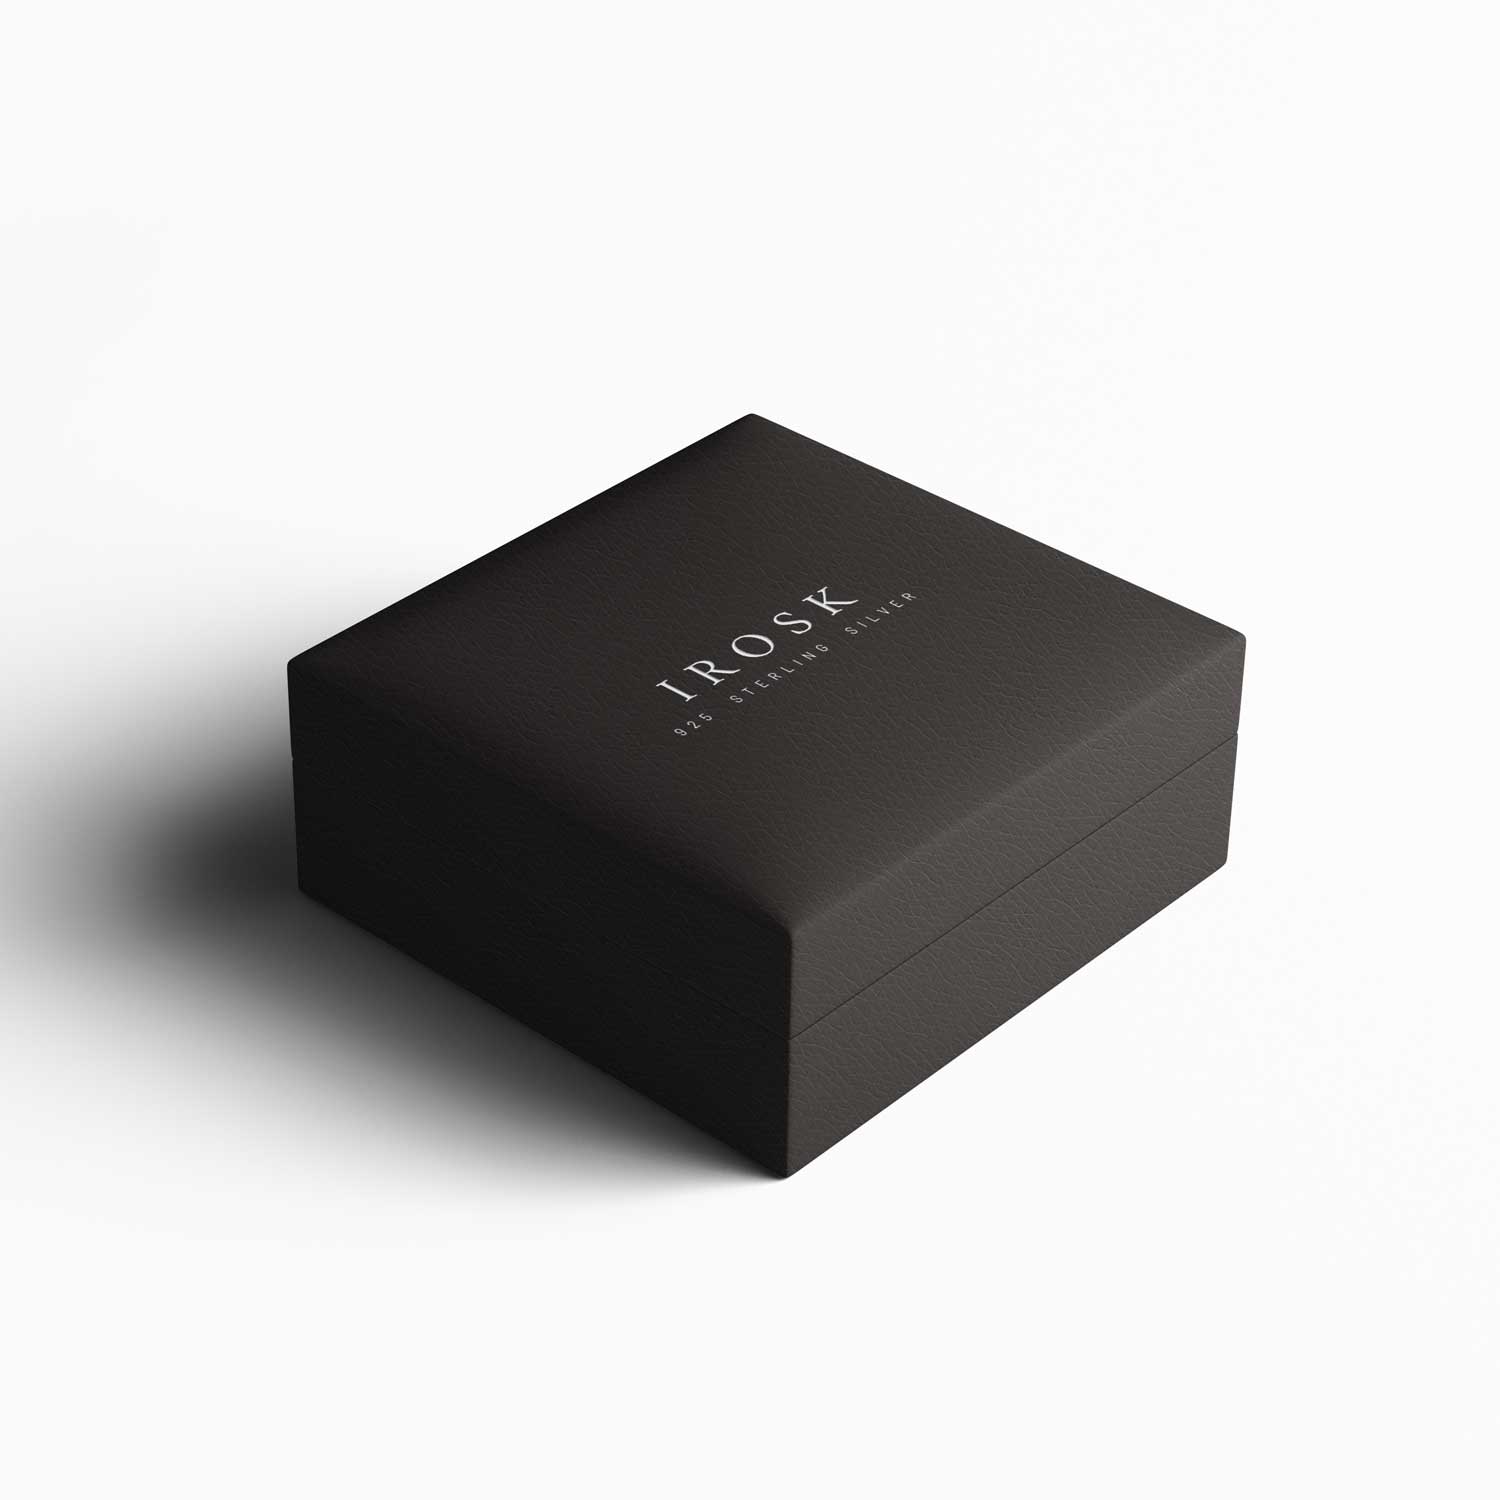 photo displaying irosk jewellery box which comes complimentary with this ring